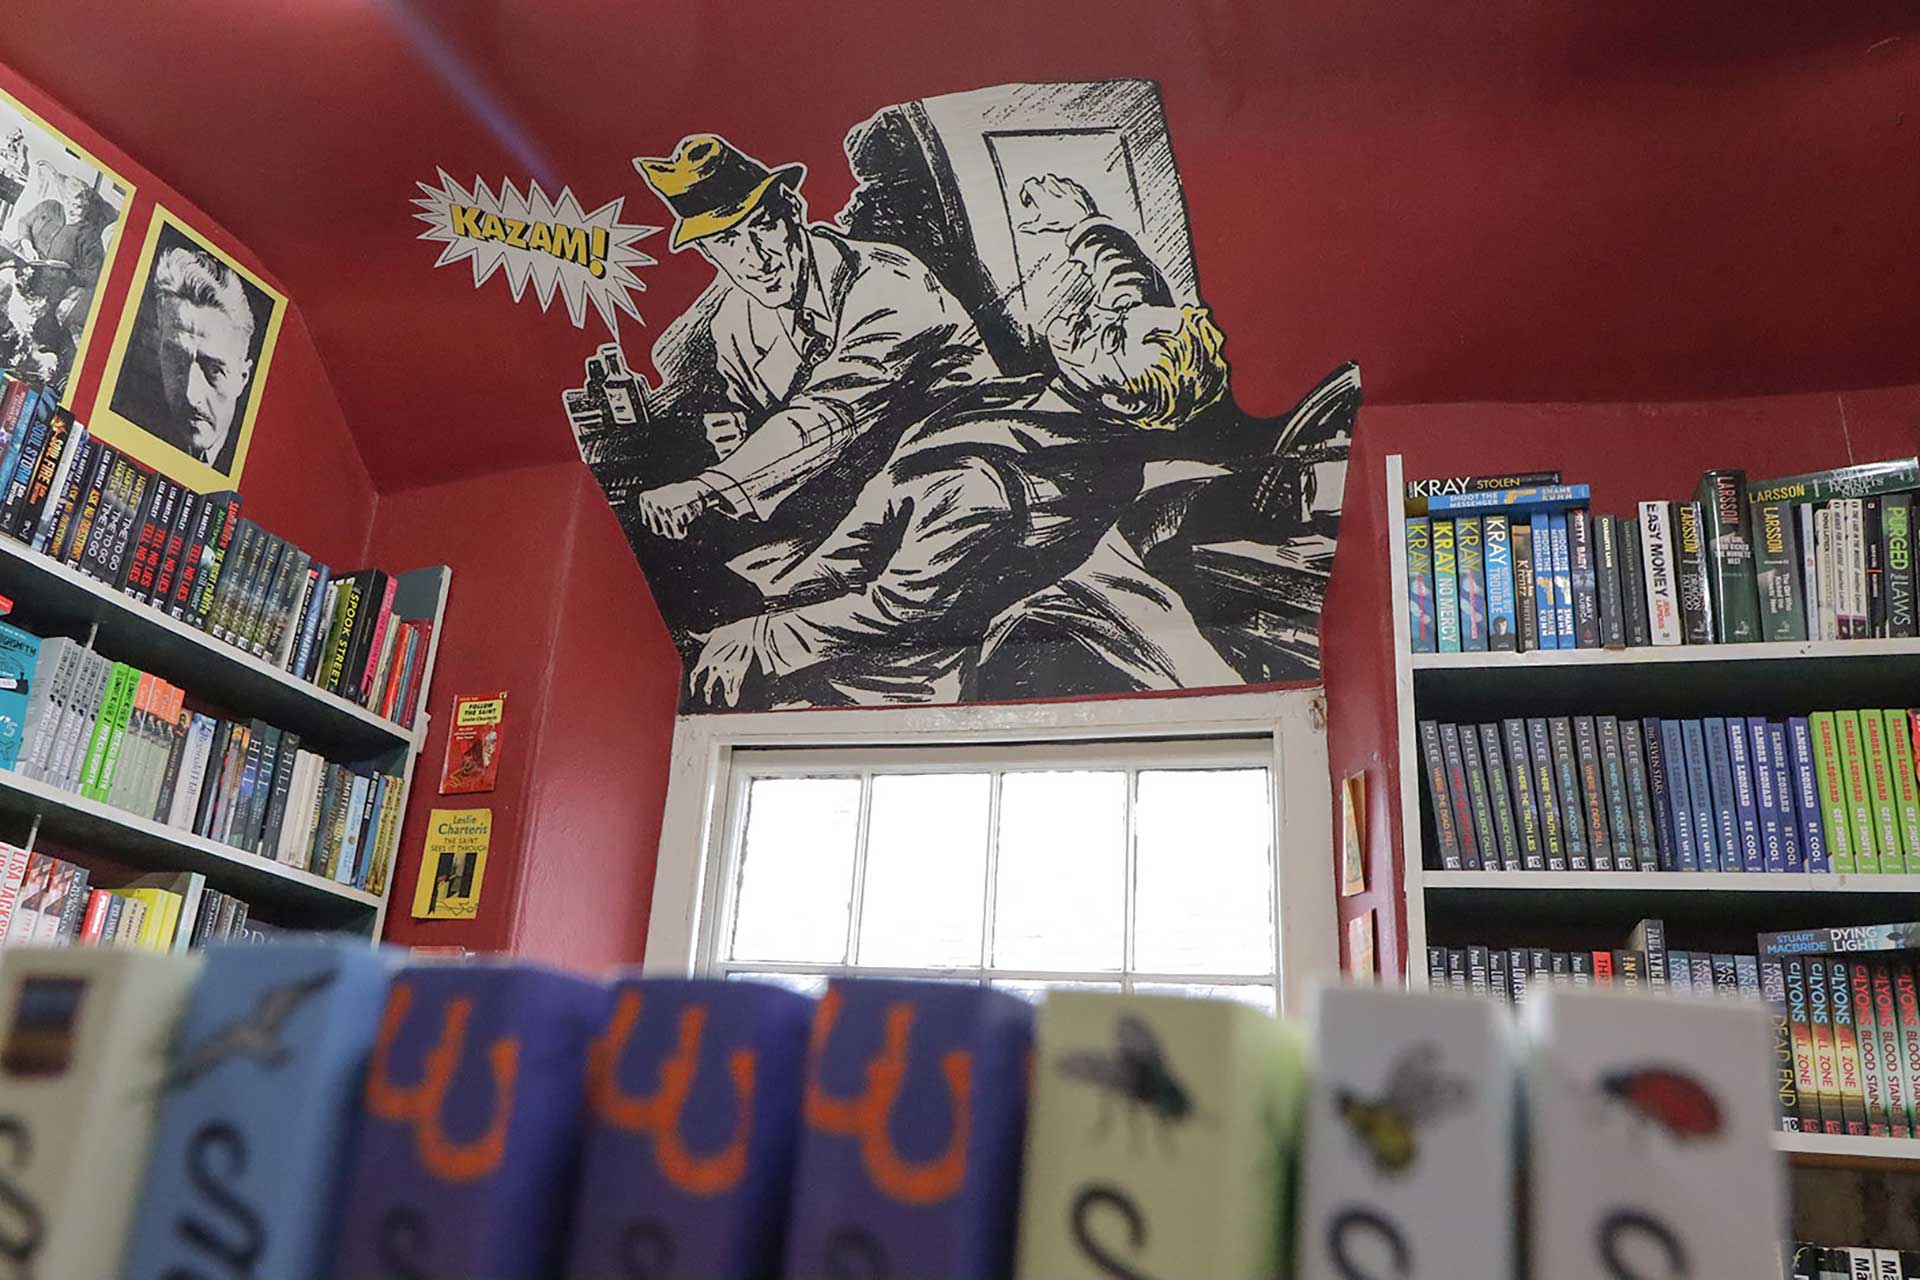 Comic mural and bookshelves at the Murder and Mayhem bookshop in Hay-on-Wye